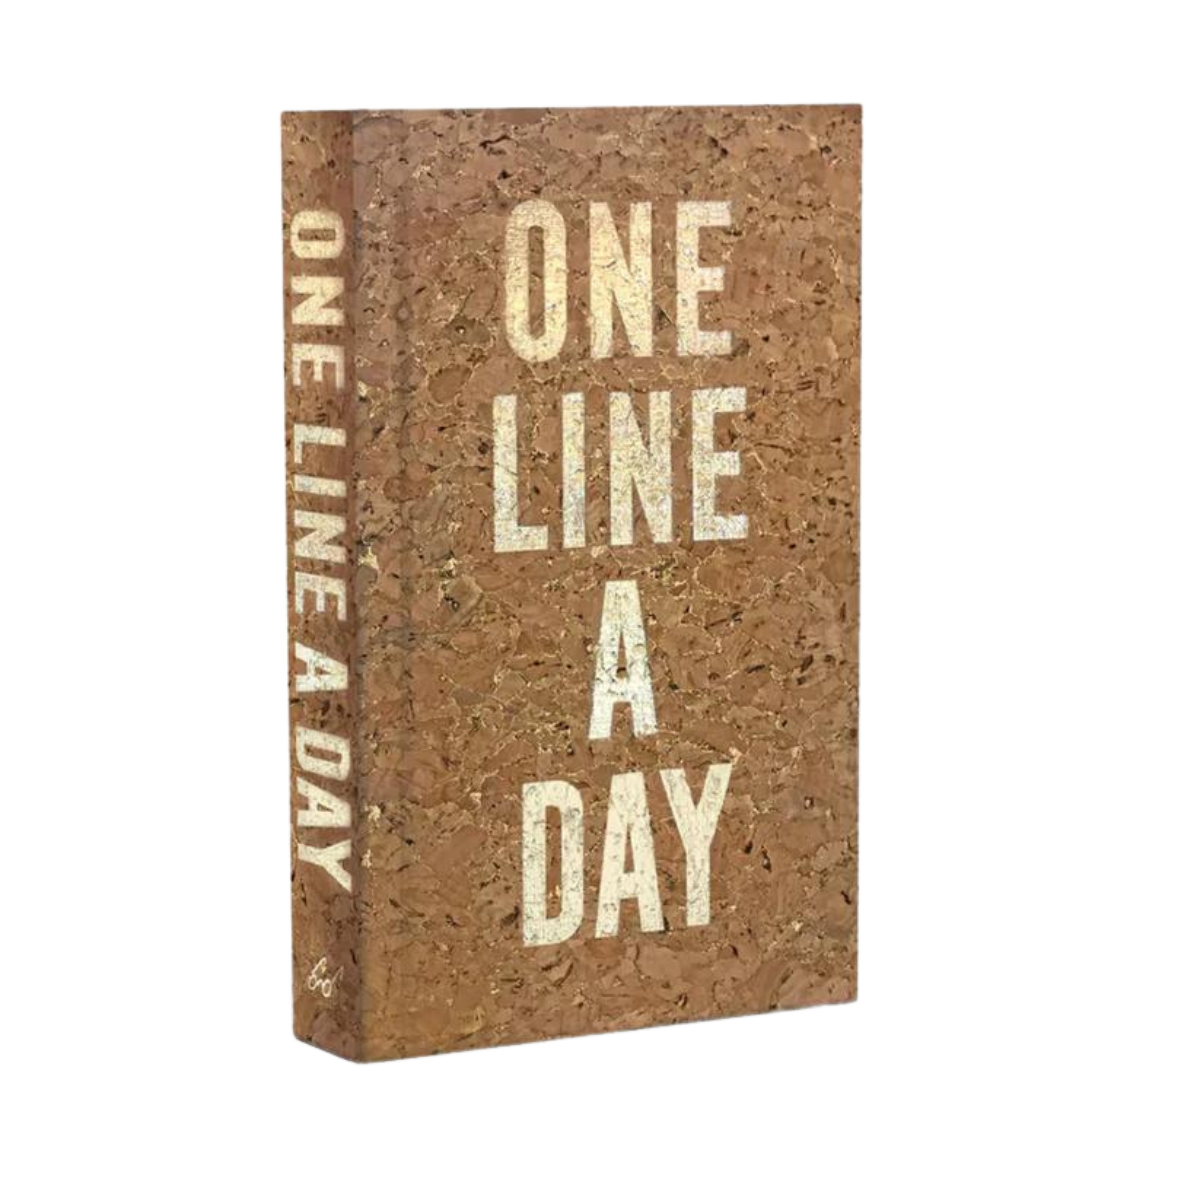 One Line A Day Journal